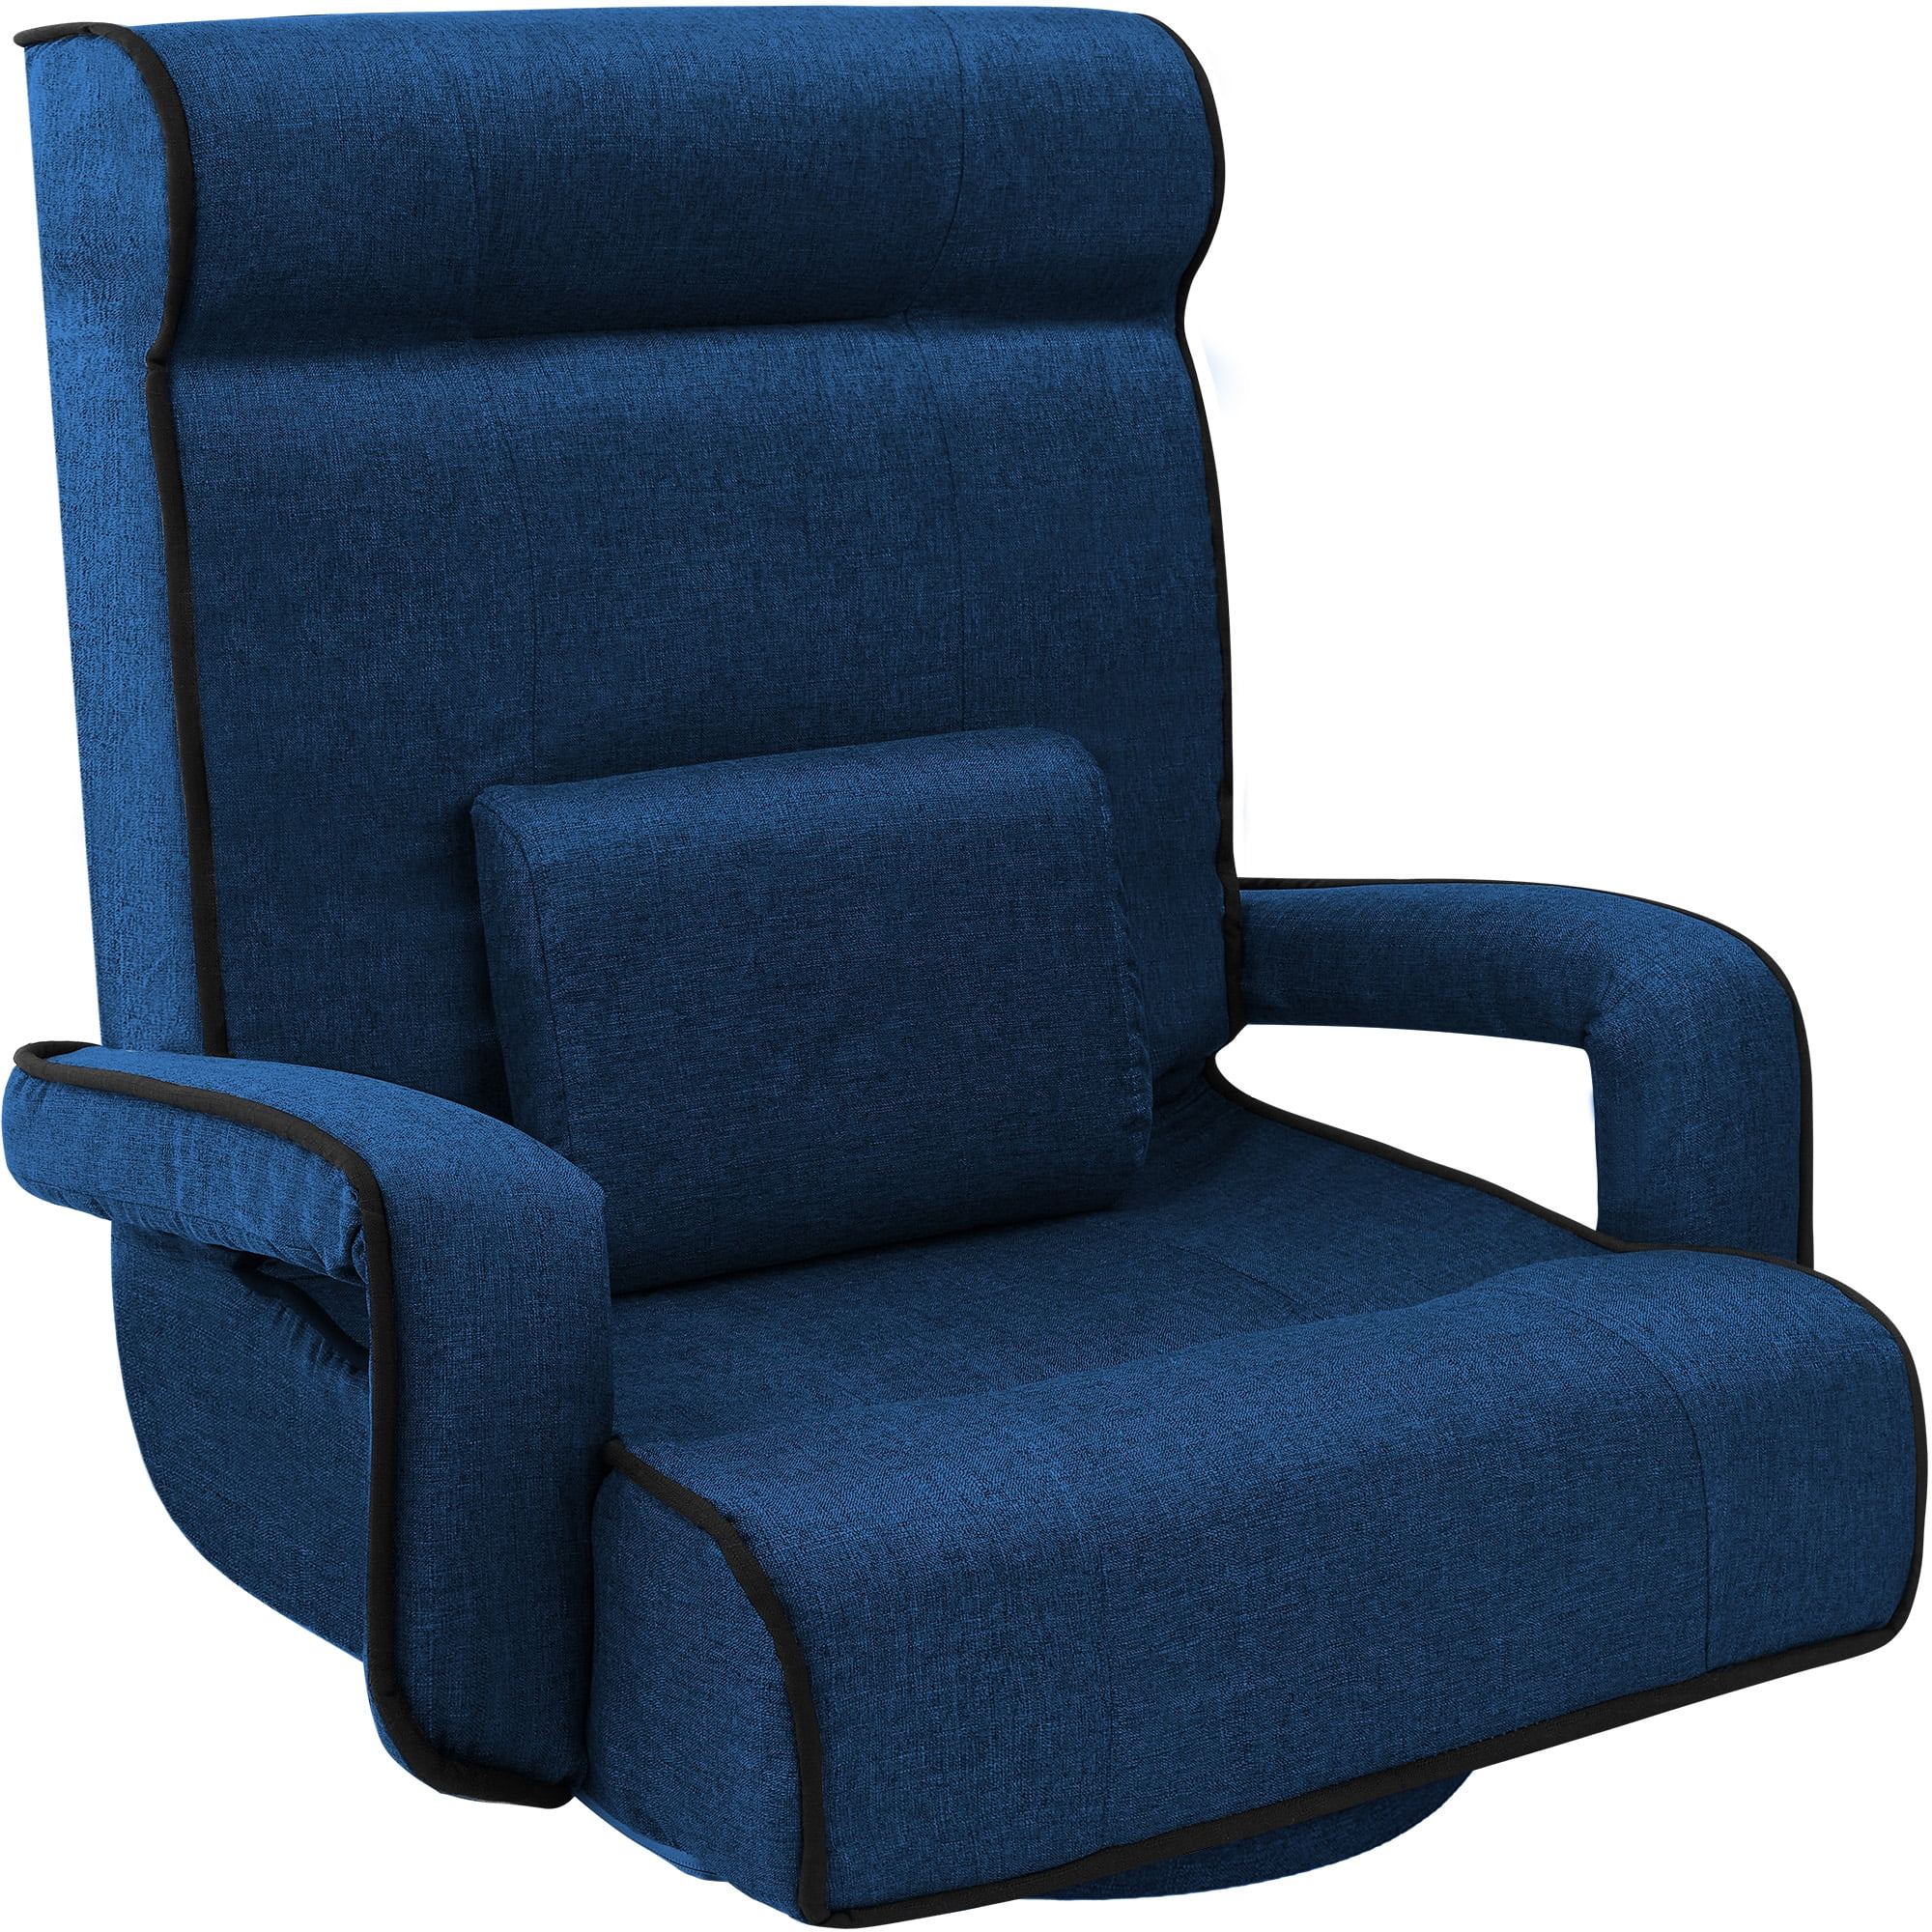 FORCLOVER Blue Leather Reclining Swivel Game Chair with Adjustable Arms and Lumbar Massage Cushion